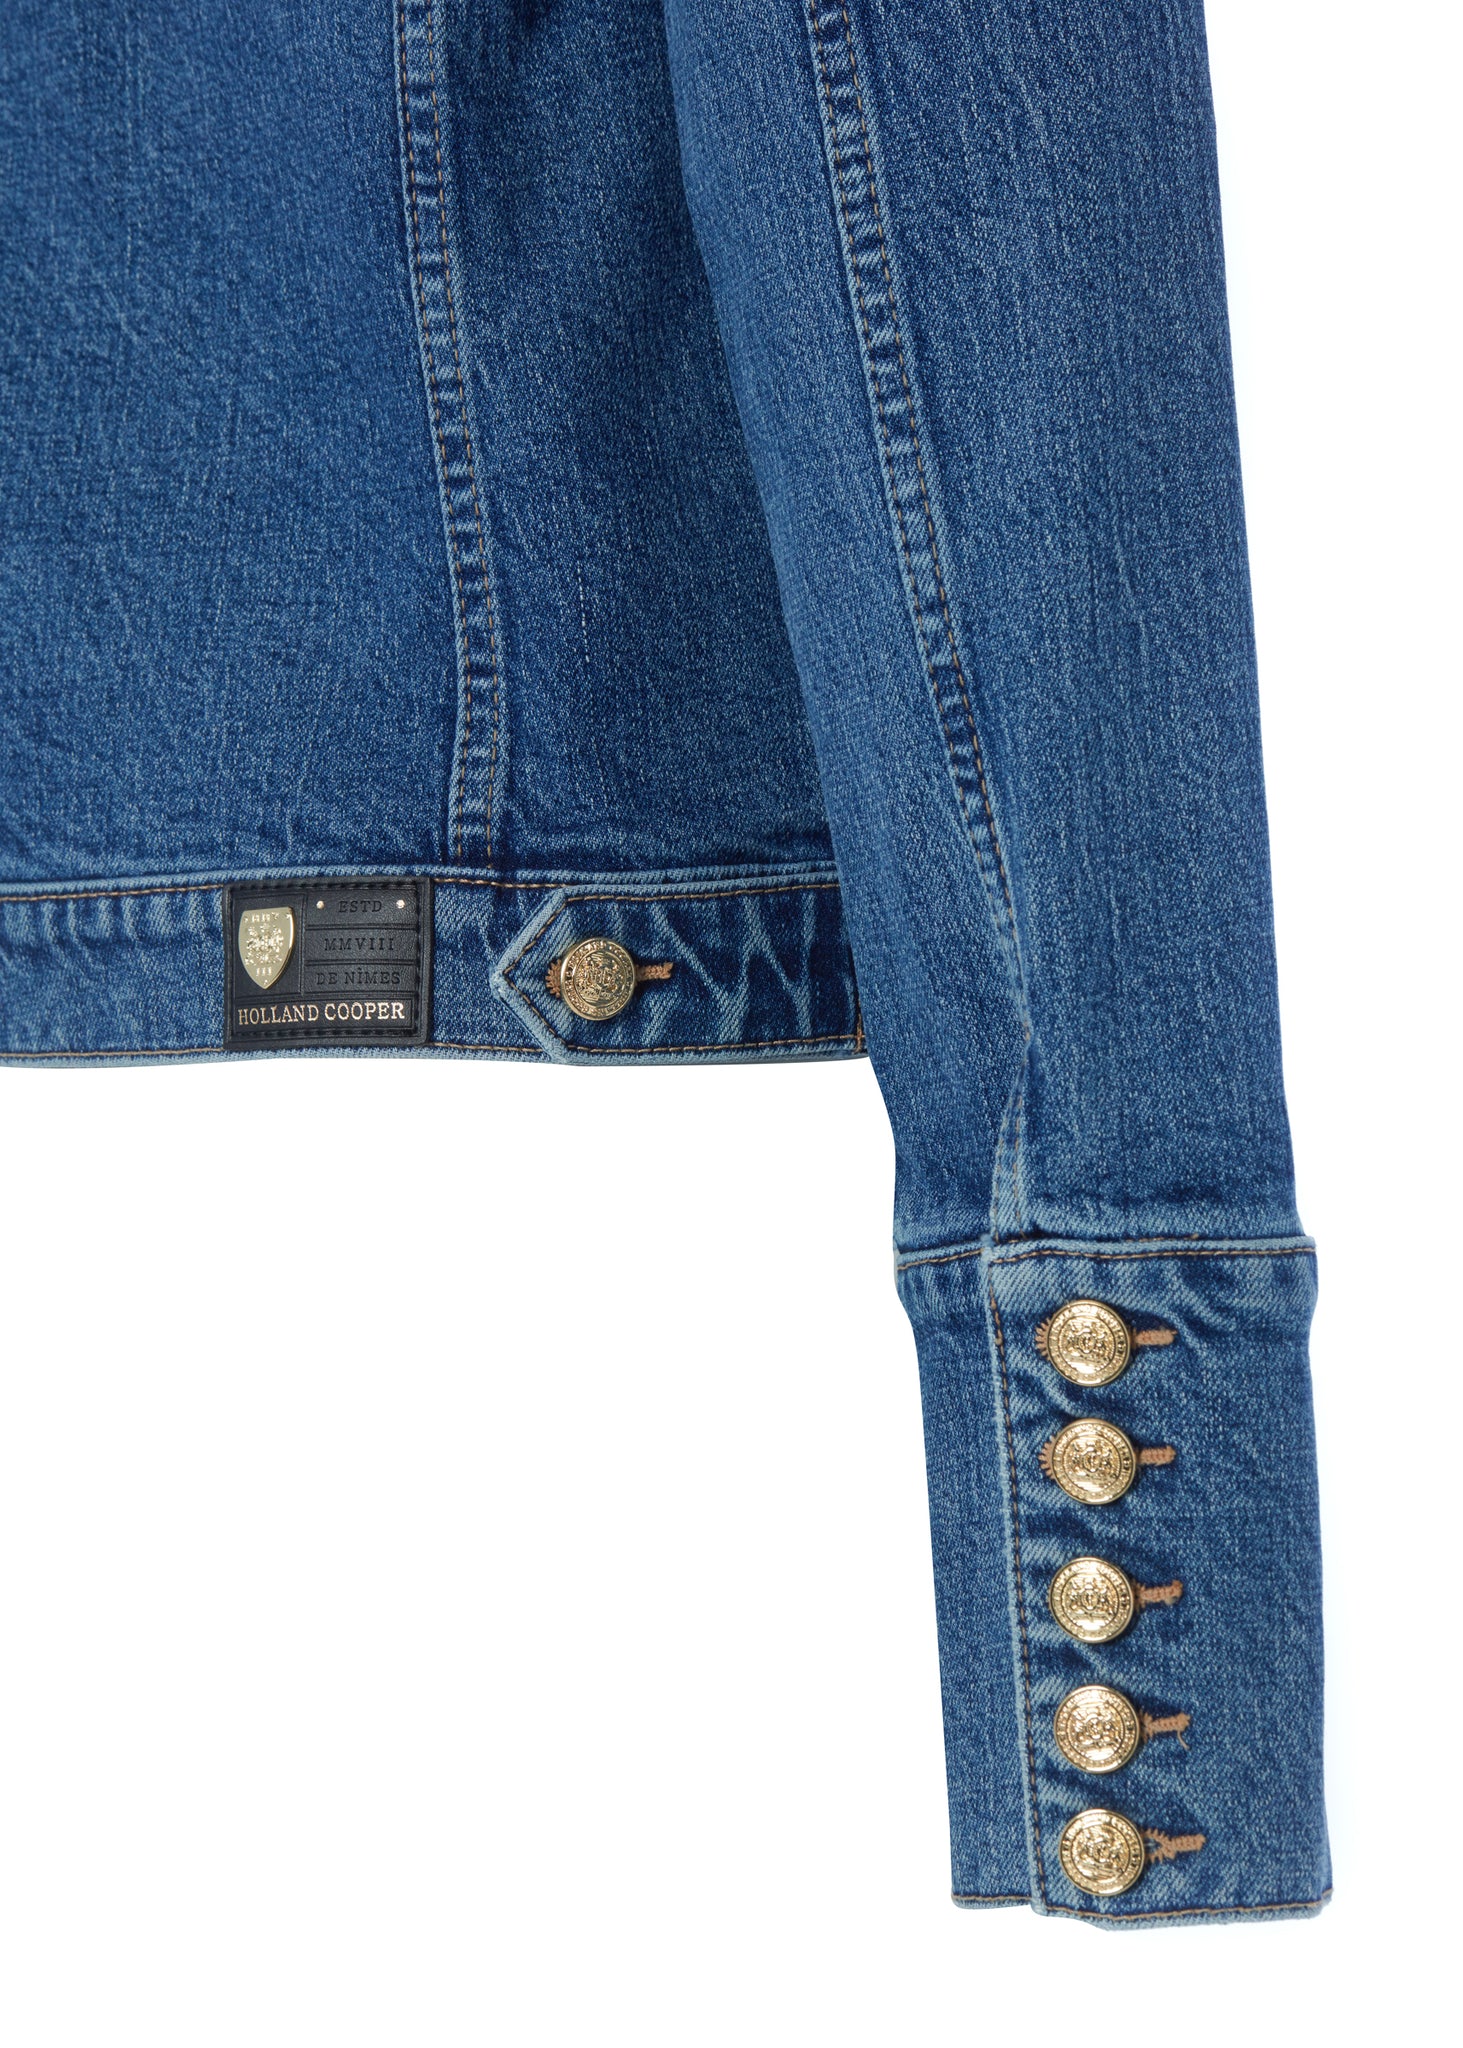 gold button detail on cuffs of classic indigo denim jacket waist length with gold buttons on front, pockets and cuffs with holland cooper embroidery on back